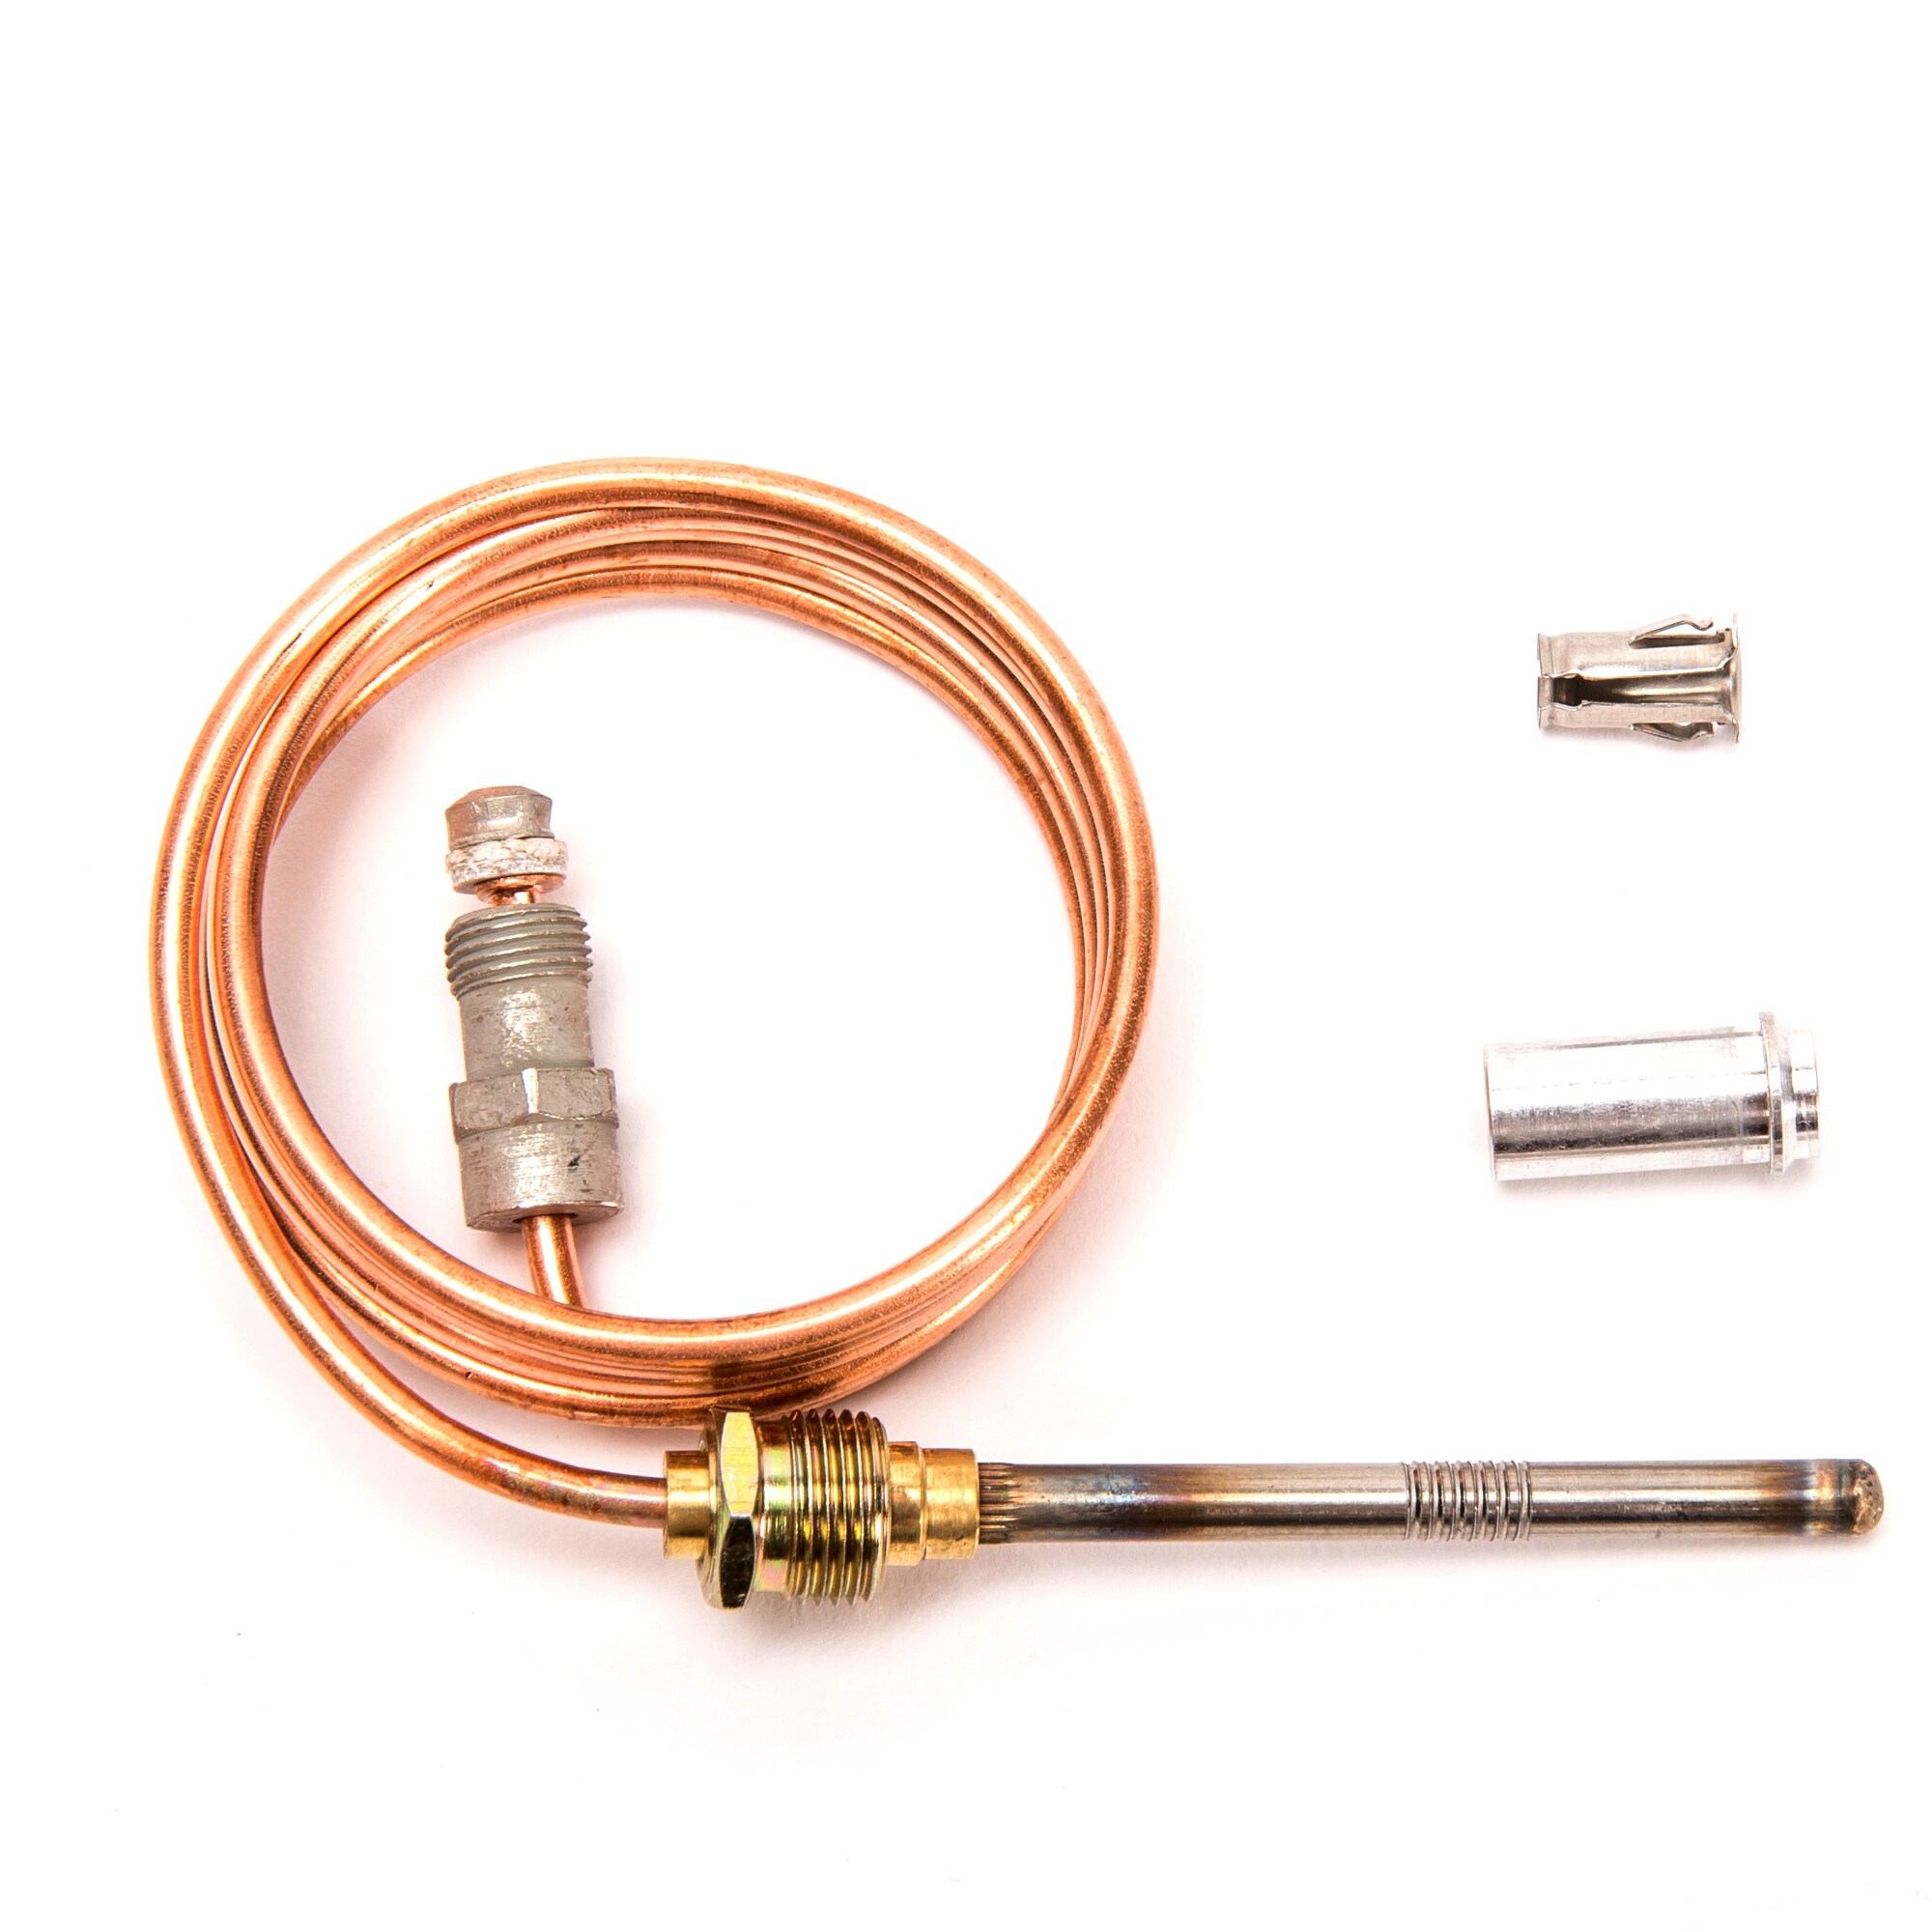 Thermocouple Replacement for Honeywell Tradeline Gas Furnace Water Heater 18 Thermocouple Q340A1066